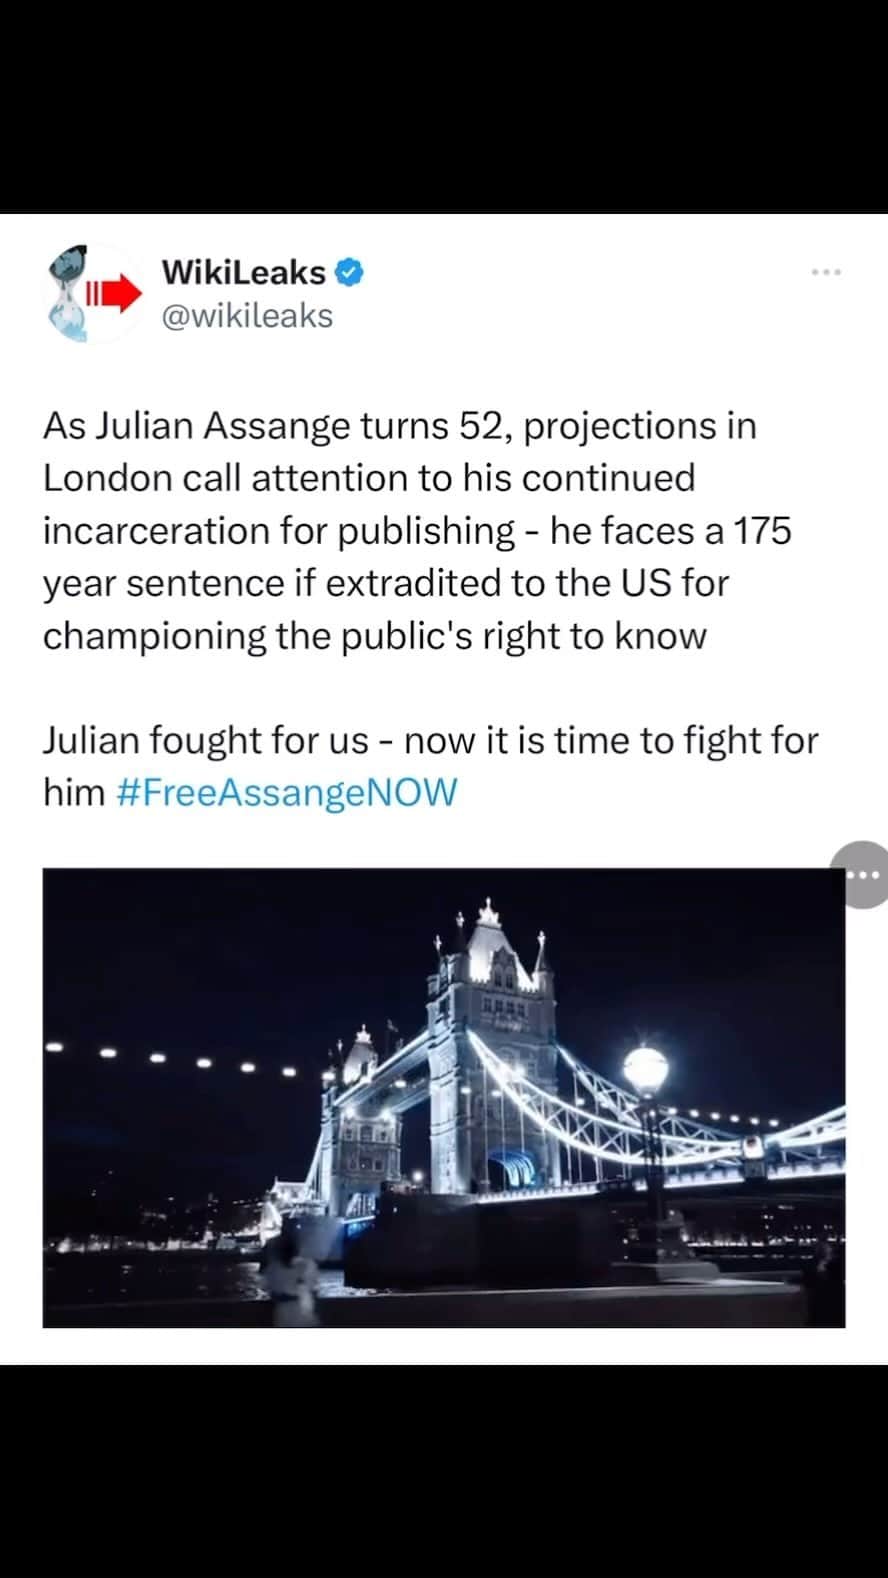 WikiLeaksのインスタグラム：「Julian fought for us - now it is time to fight for him #FreeAssangeNOW」